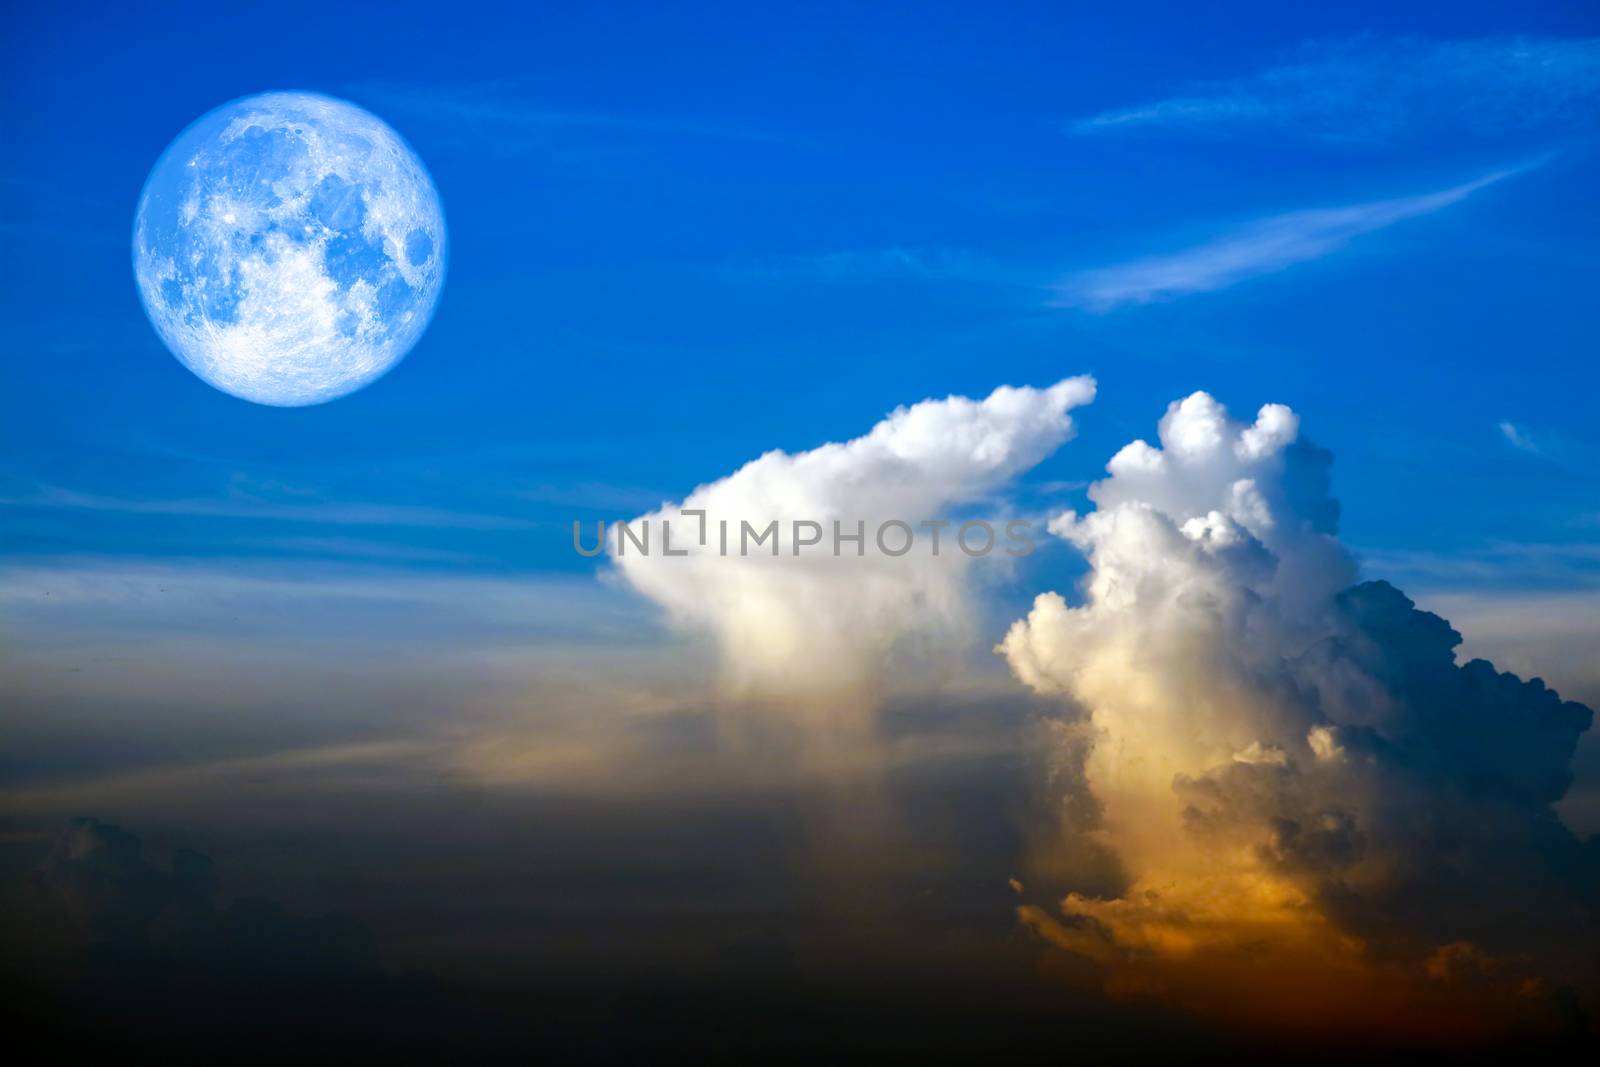 full worm moon back on silhouette heap cloud on sunset sky, Elements of this image furnished by NASA